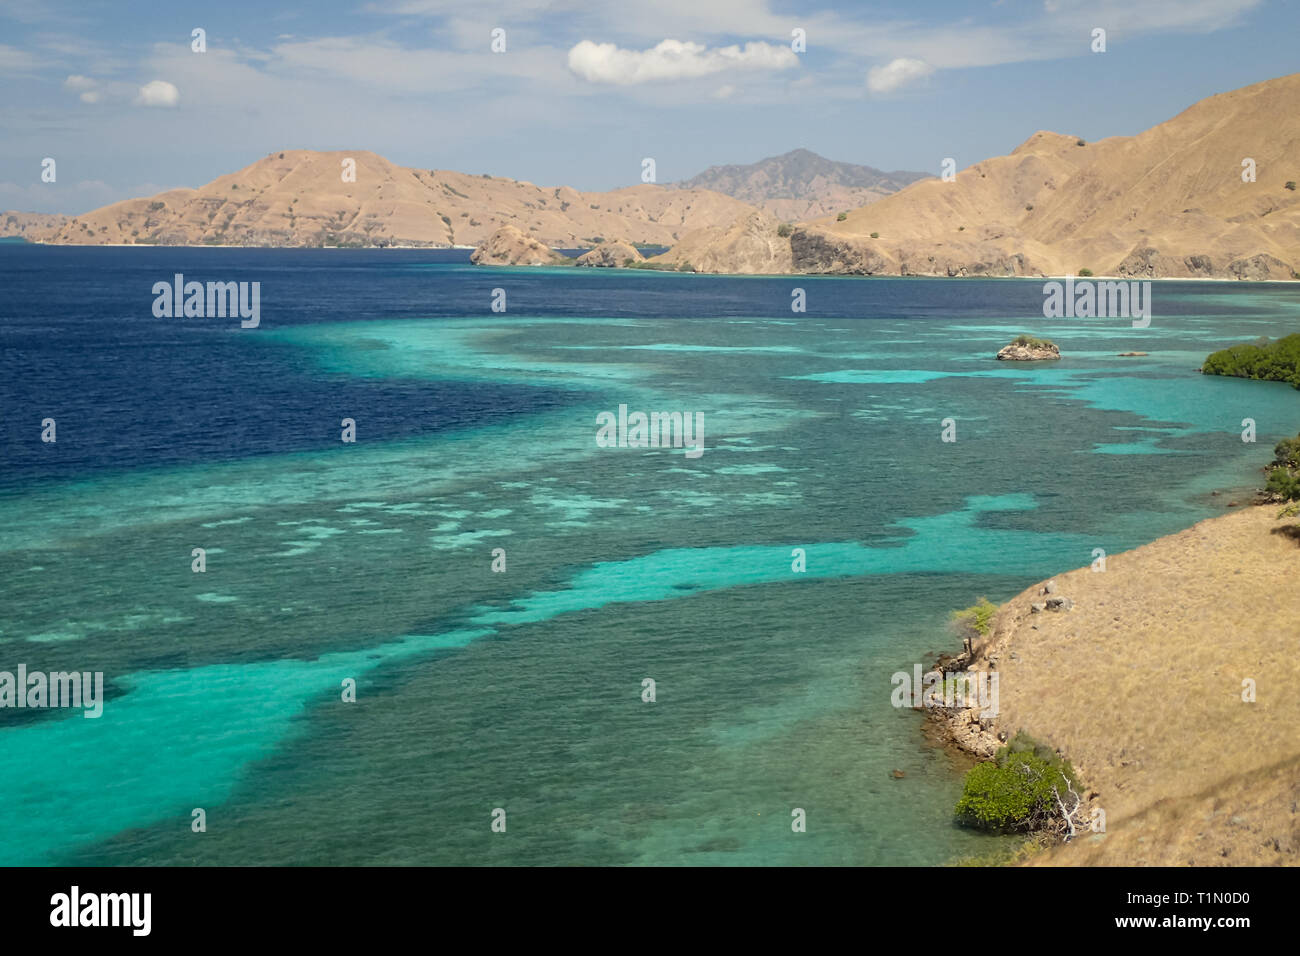 Arid barren  mountains of Nusa Tenggara Timur surrounded by coral reef and blue tropical waters Stock Photo